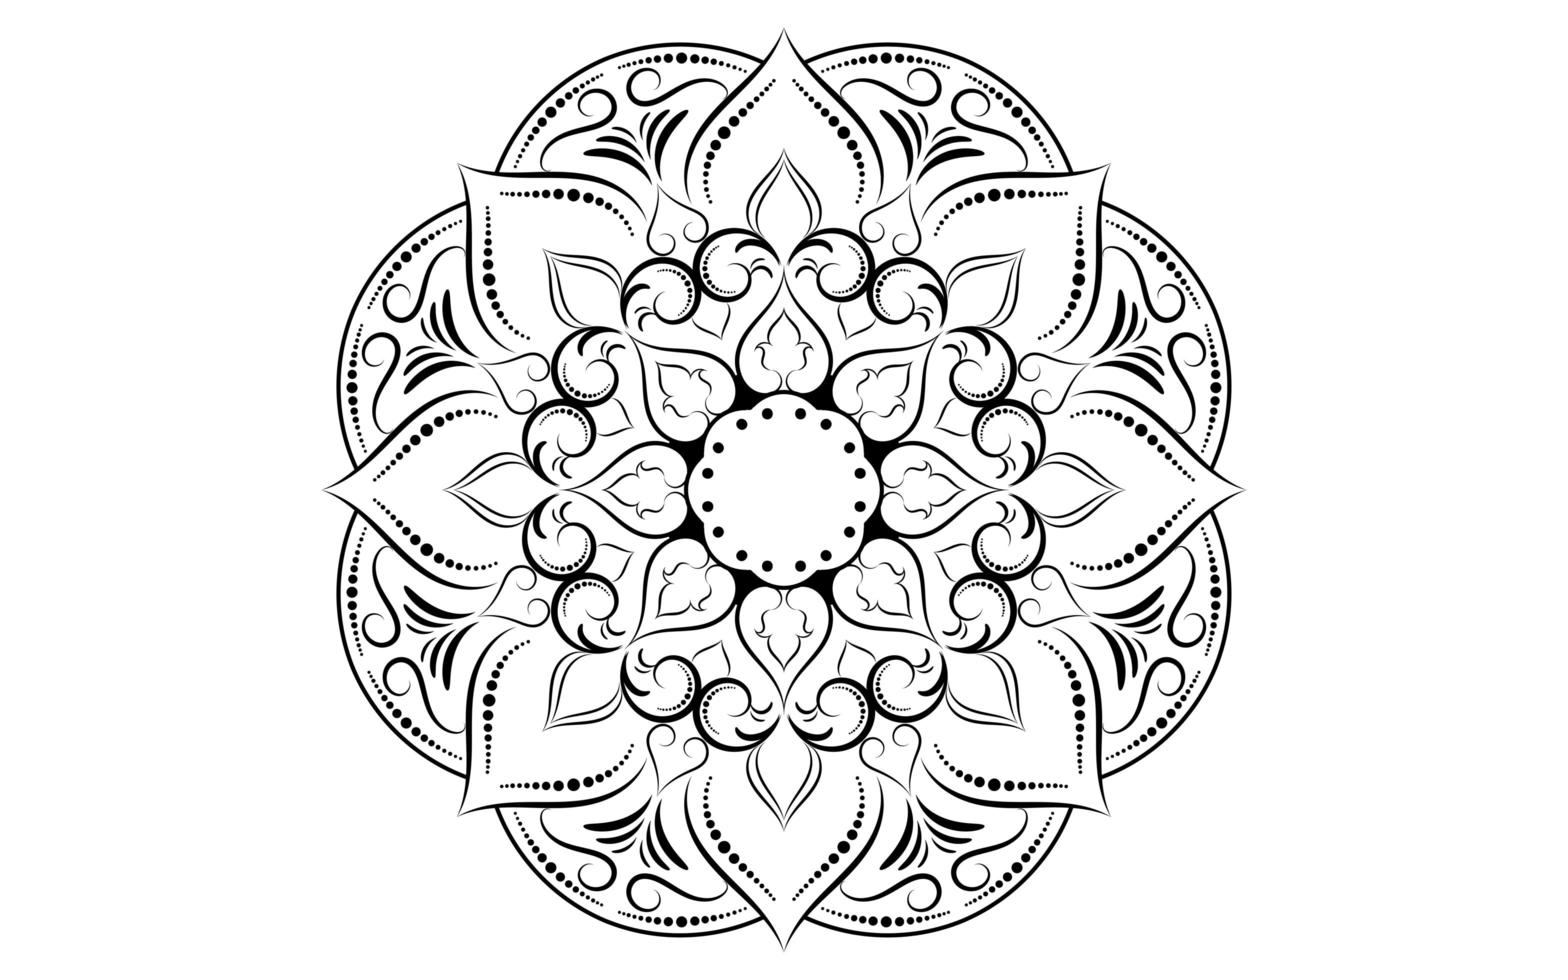 Black and white floral mandala pattern vector